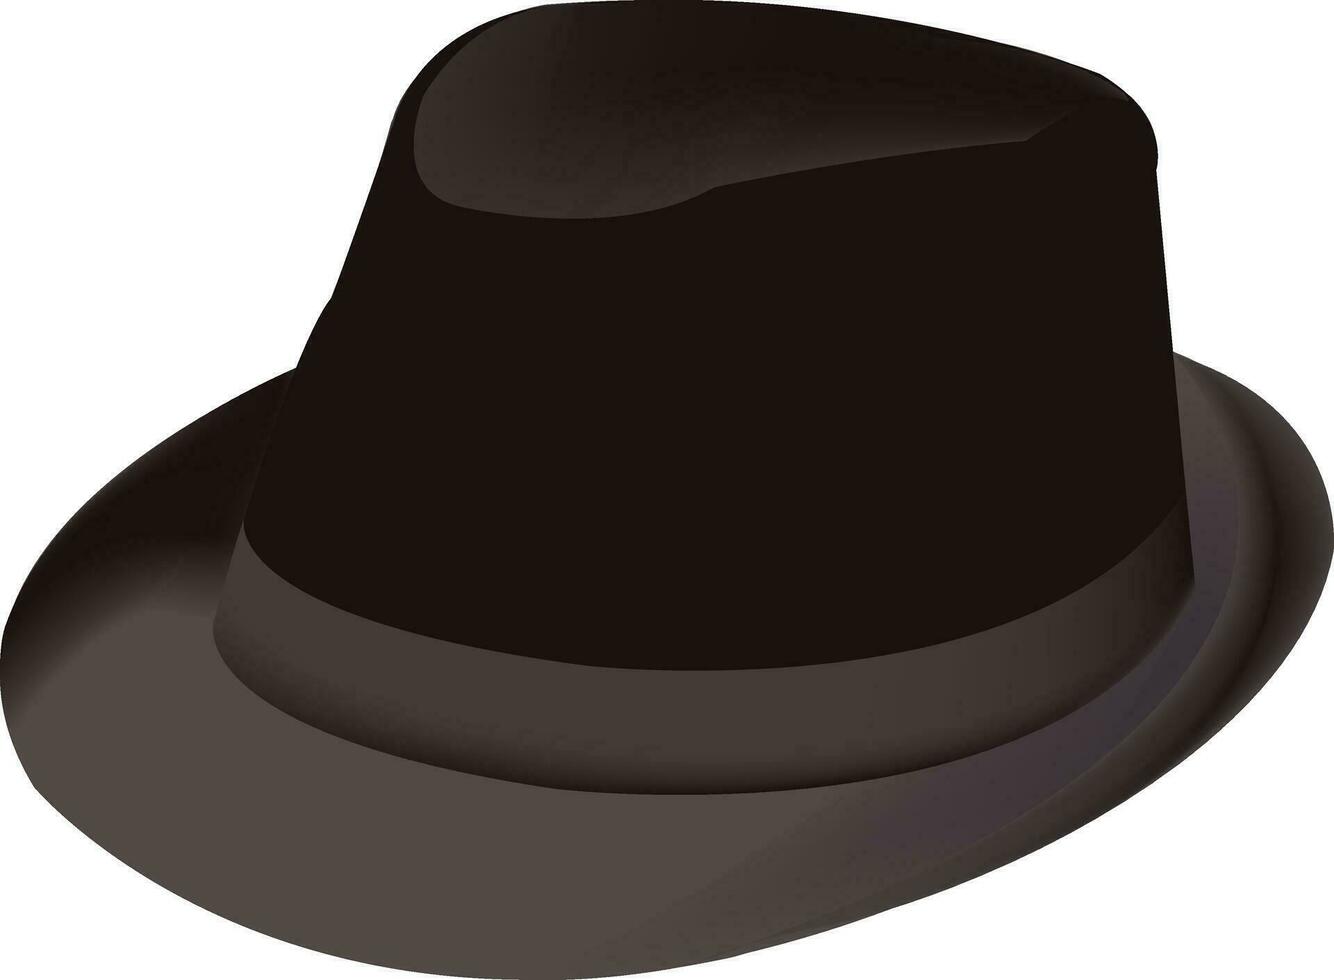 hat with classic dark color visor vector